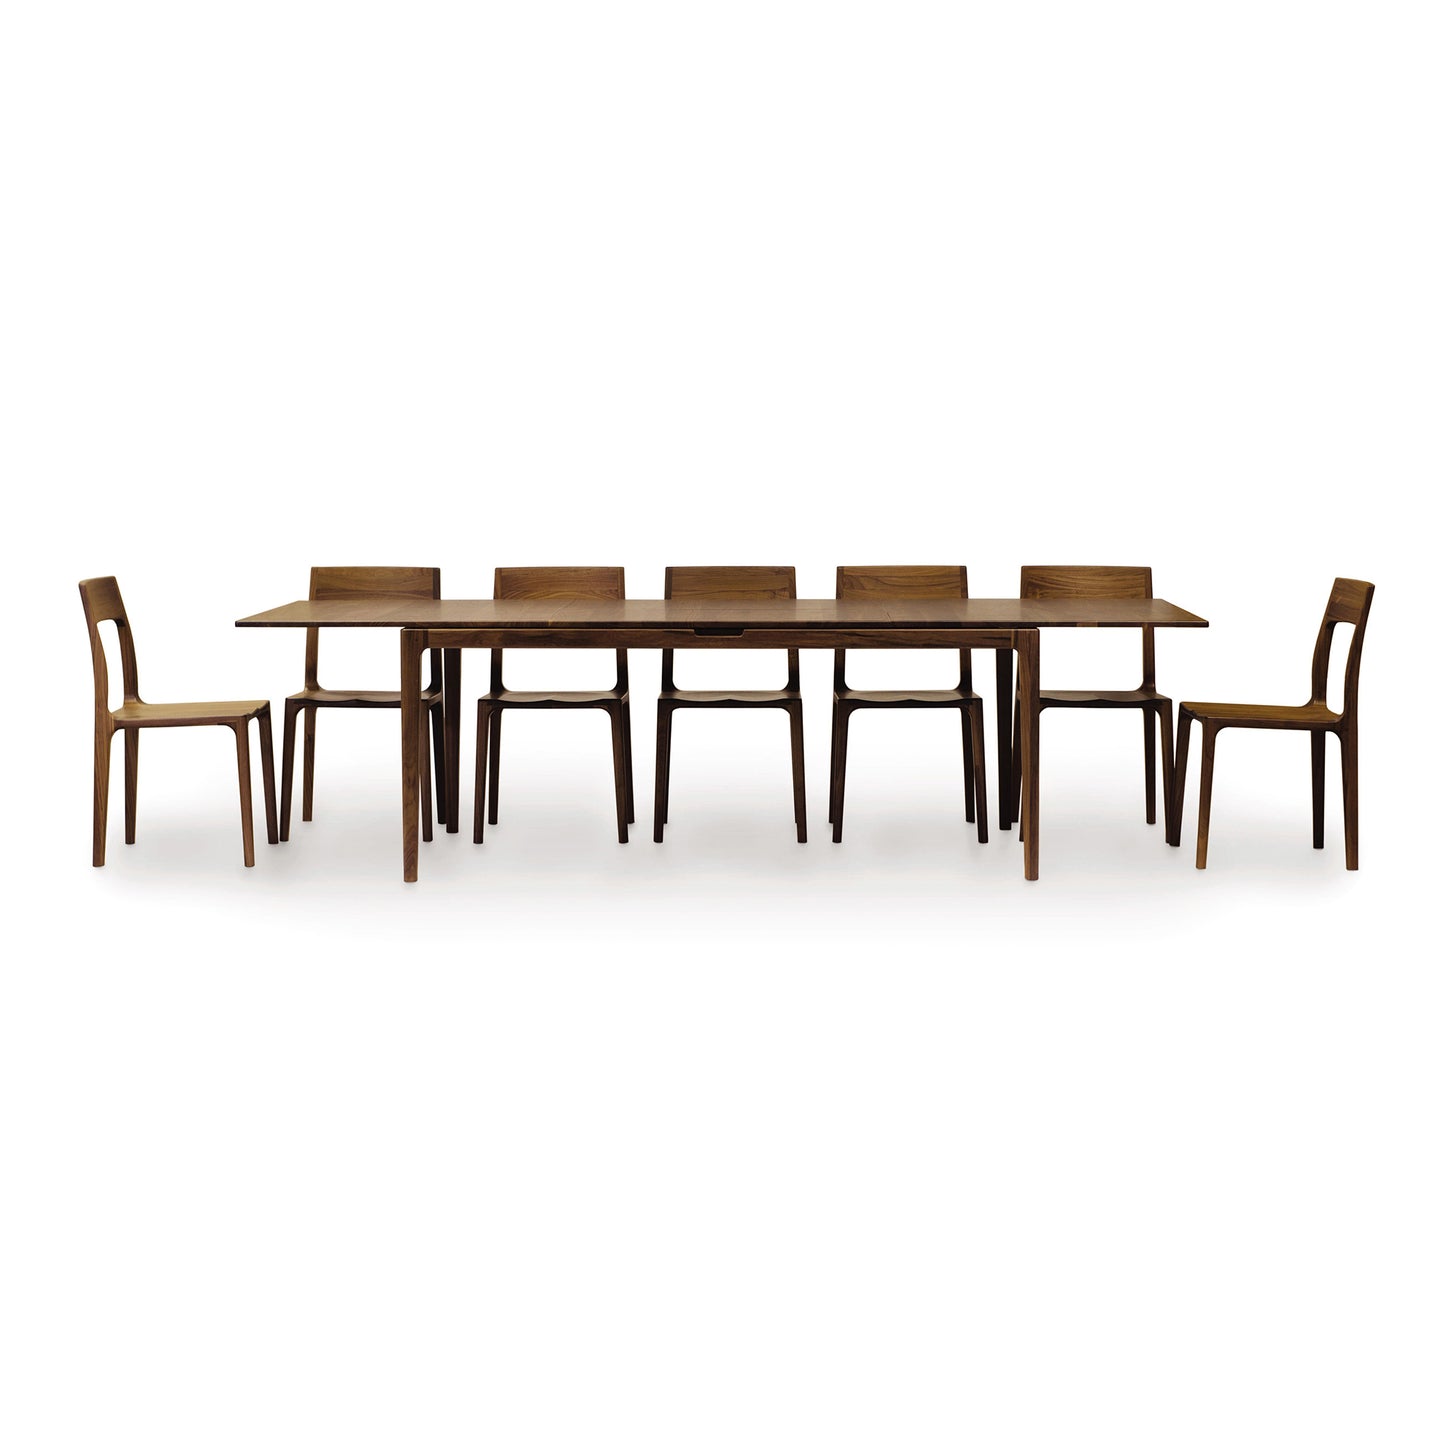 A Copeland Furniture Lisse Extension Dining Table set with six chairs arranged neatly around it, isolated on a white background.